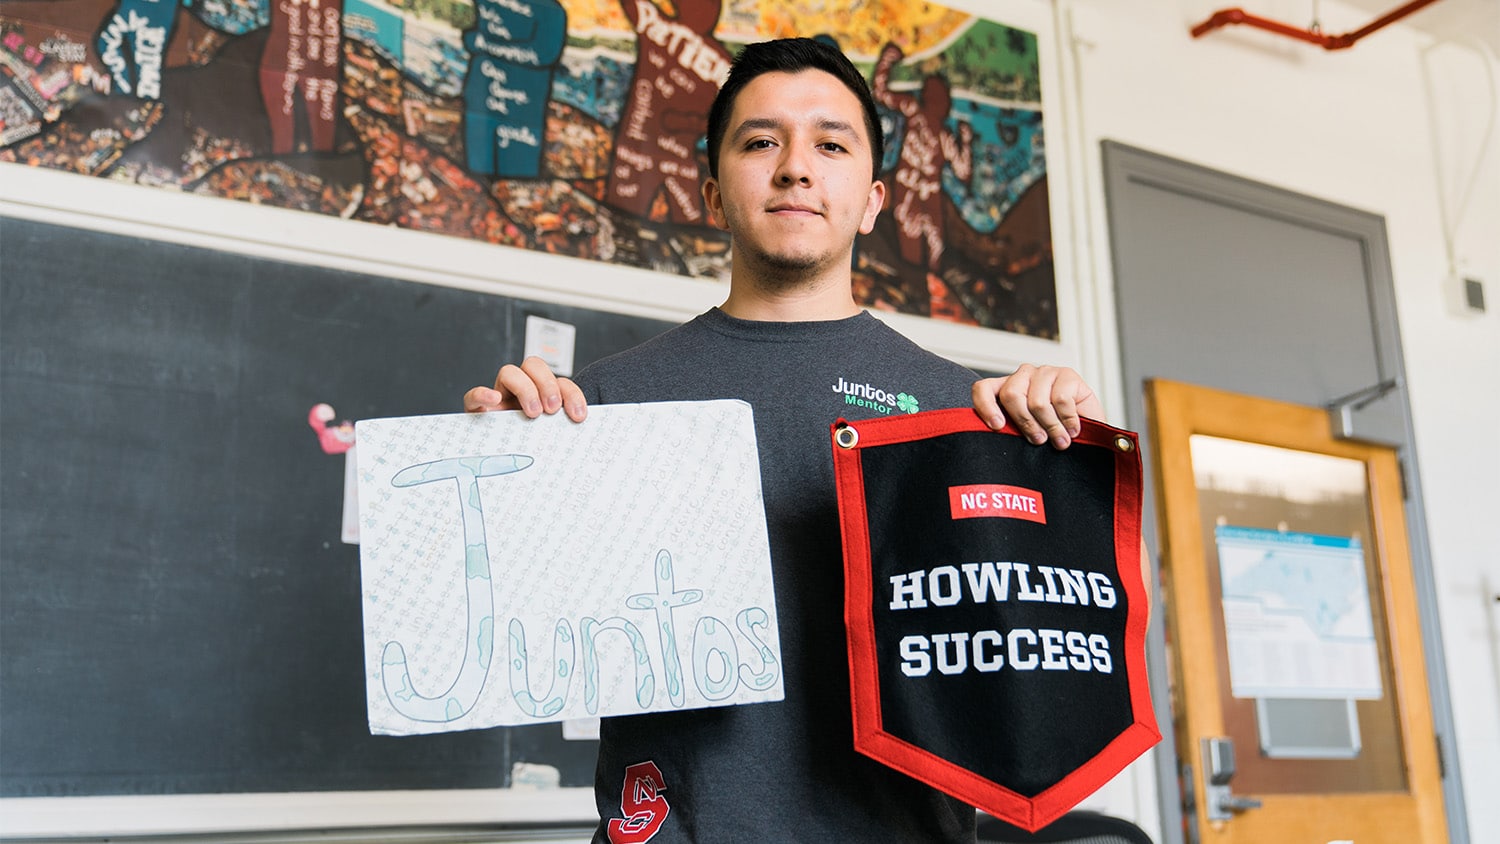 Sebastian Rios holds up a handwritten sign that reads "Juntos" and a red and black pennant that reads "Howling Success."